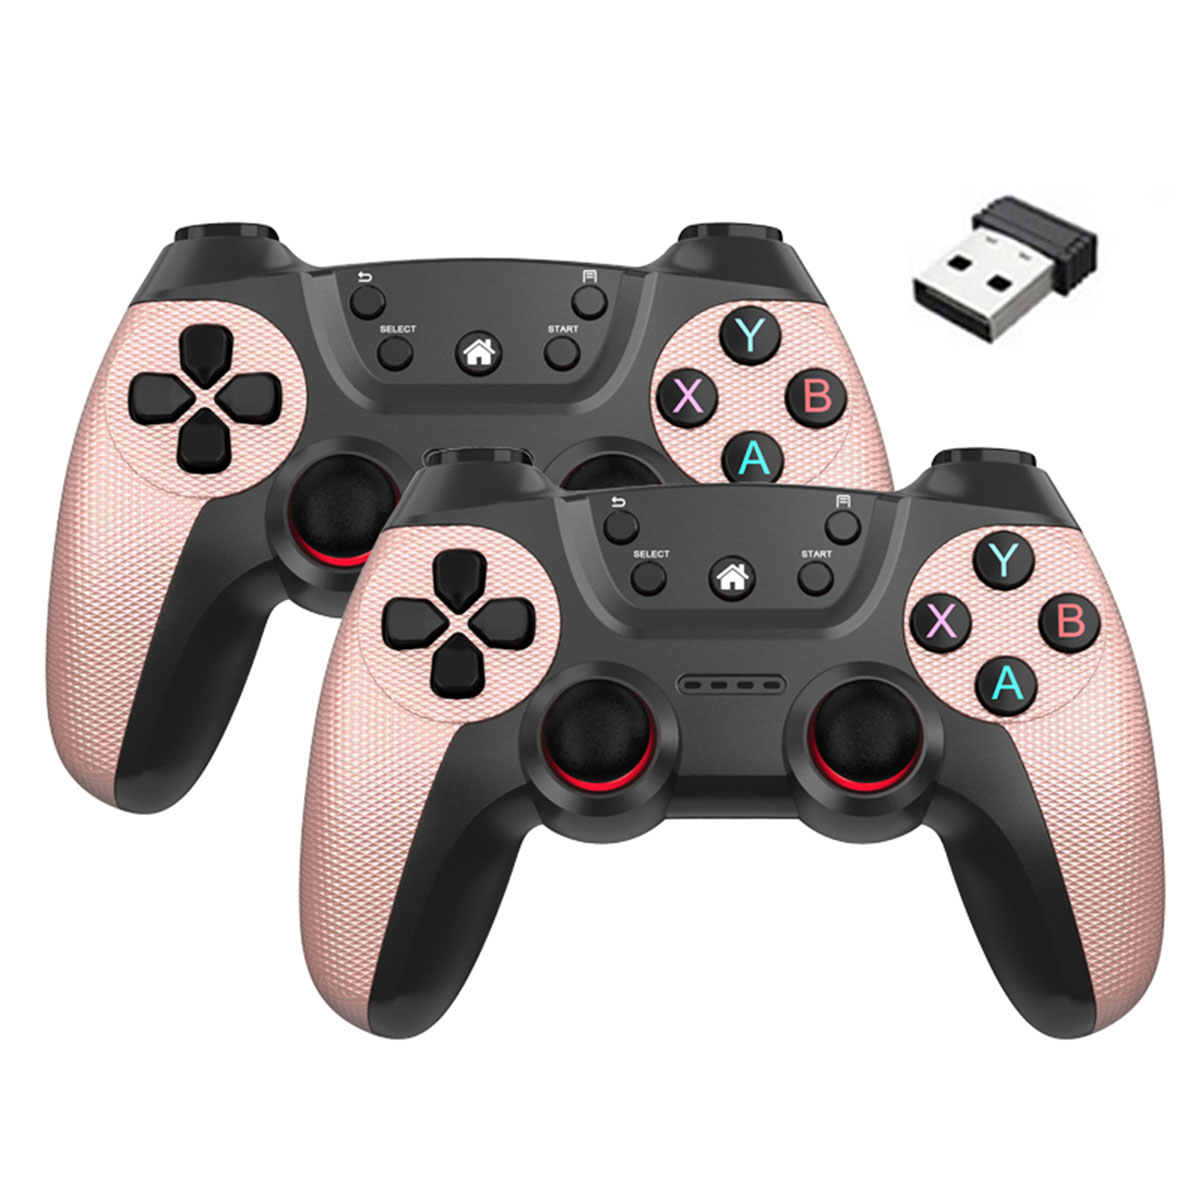 Gamepad,Android-Controller,Gamepad,2.4G,für Controller RESPIEL Rosenrosa Wireless Doppeltes PC,Android